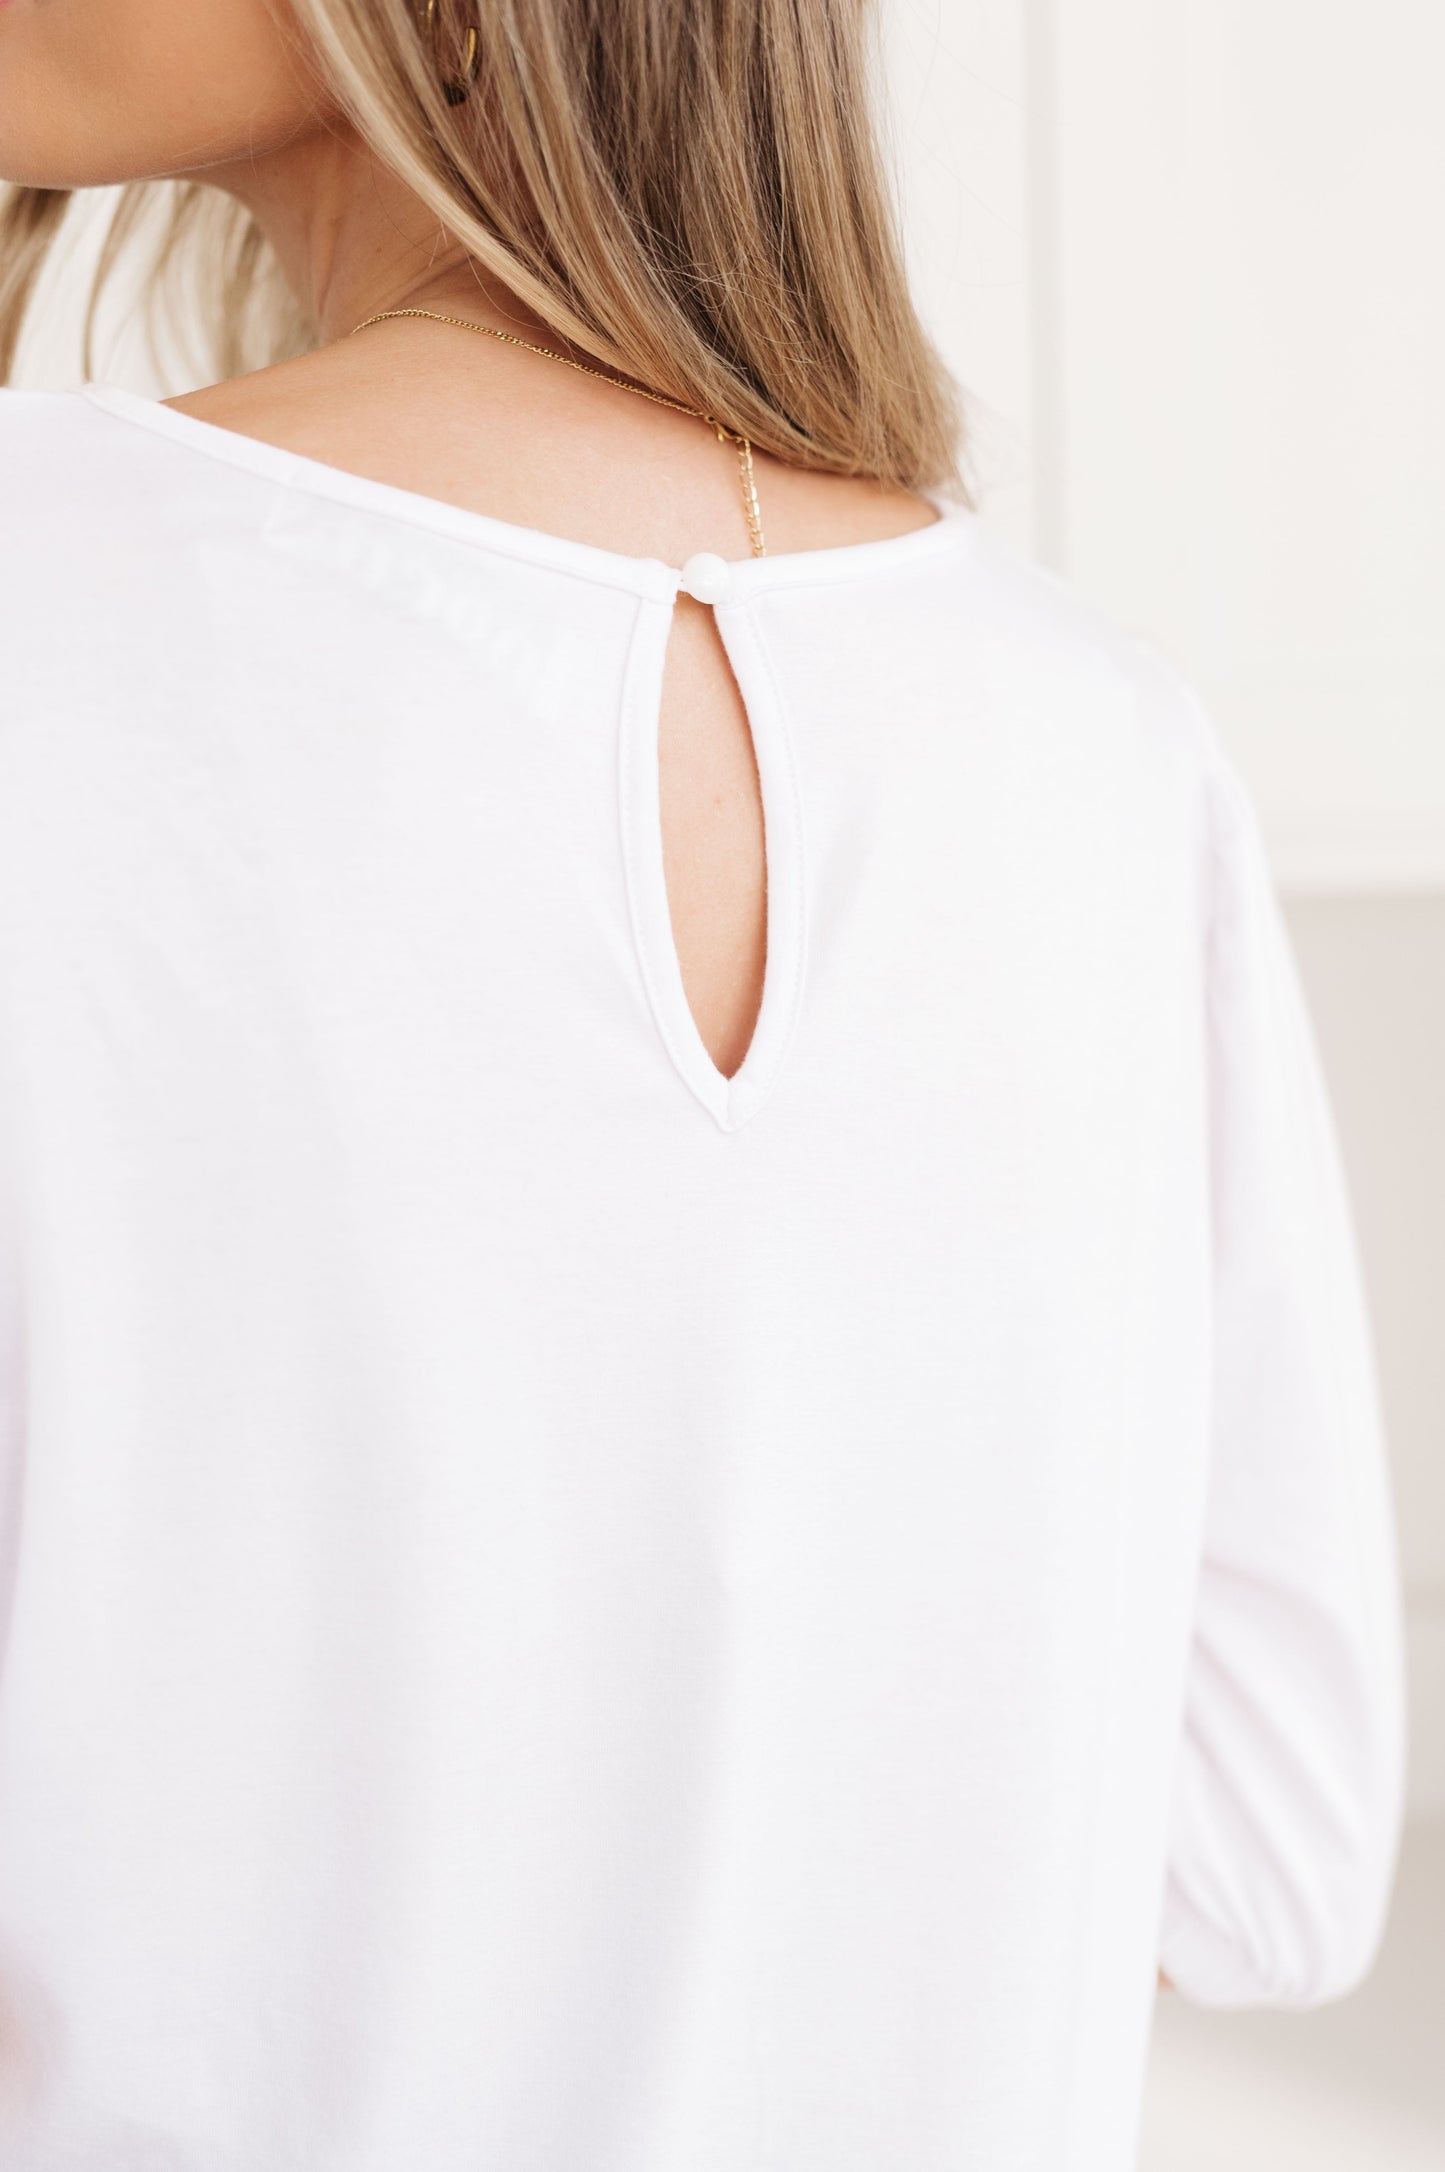 Look your best in the timelessly chic New Days Ahead White Blouse. Featuring a puff sleeve, a keyhole detail on the back, a classic white hue, and a comfortable jersey knit, this top is sure to be your new go-to for any occasion. S - 3X